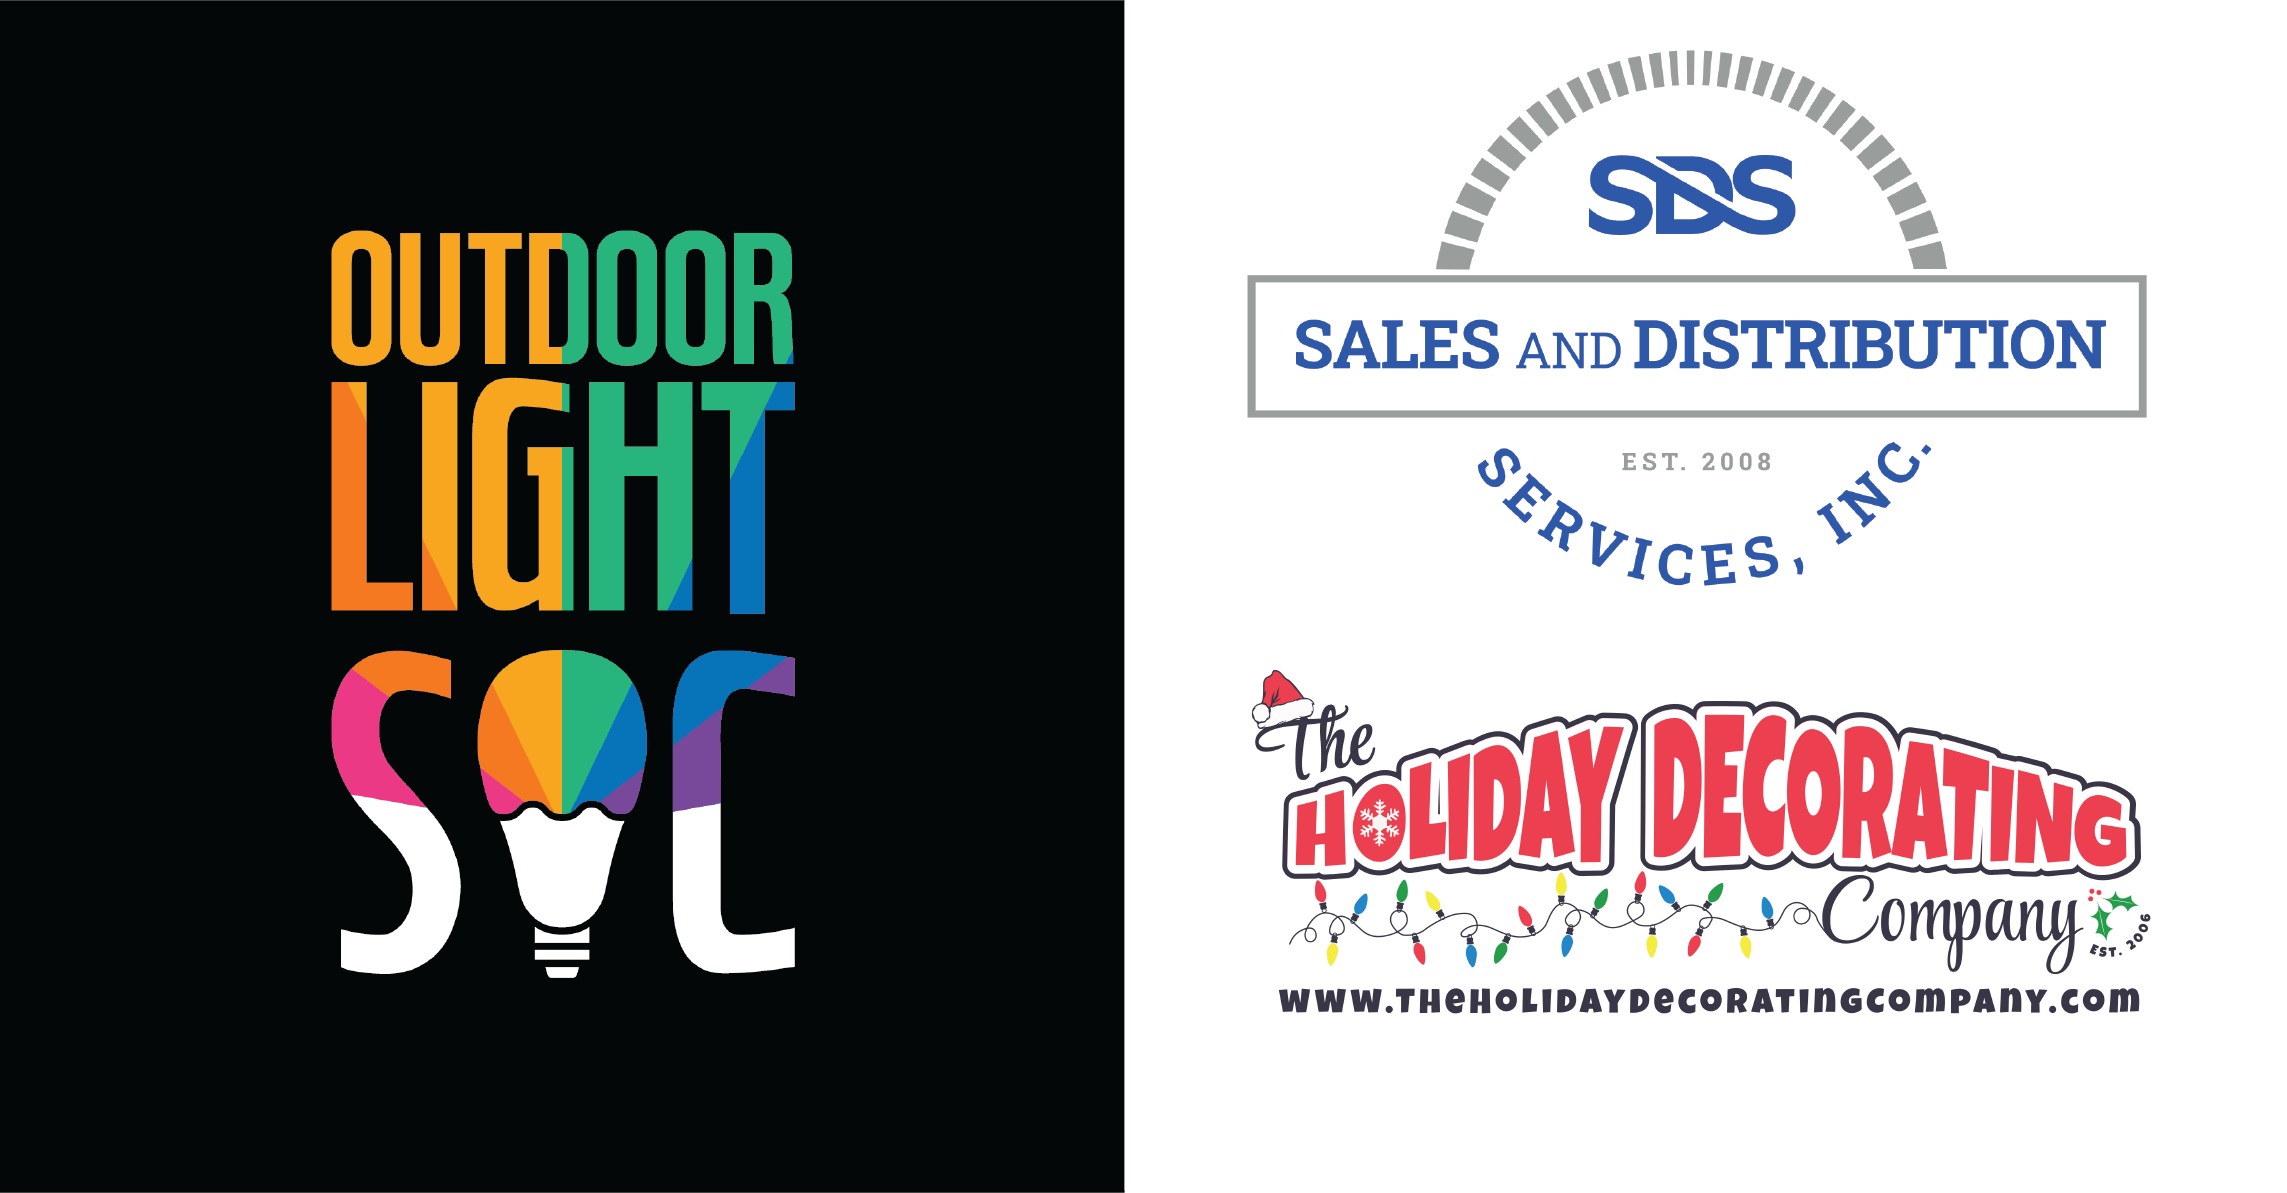 Shining Bright: Outdoor Light Soc Shines with Exclusive Distribution Deal